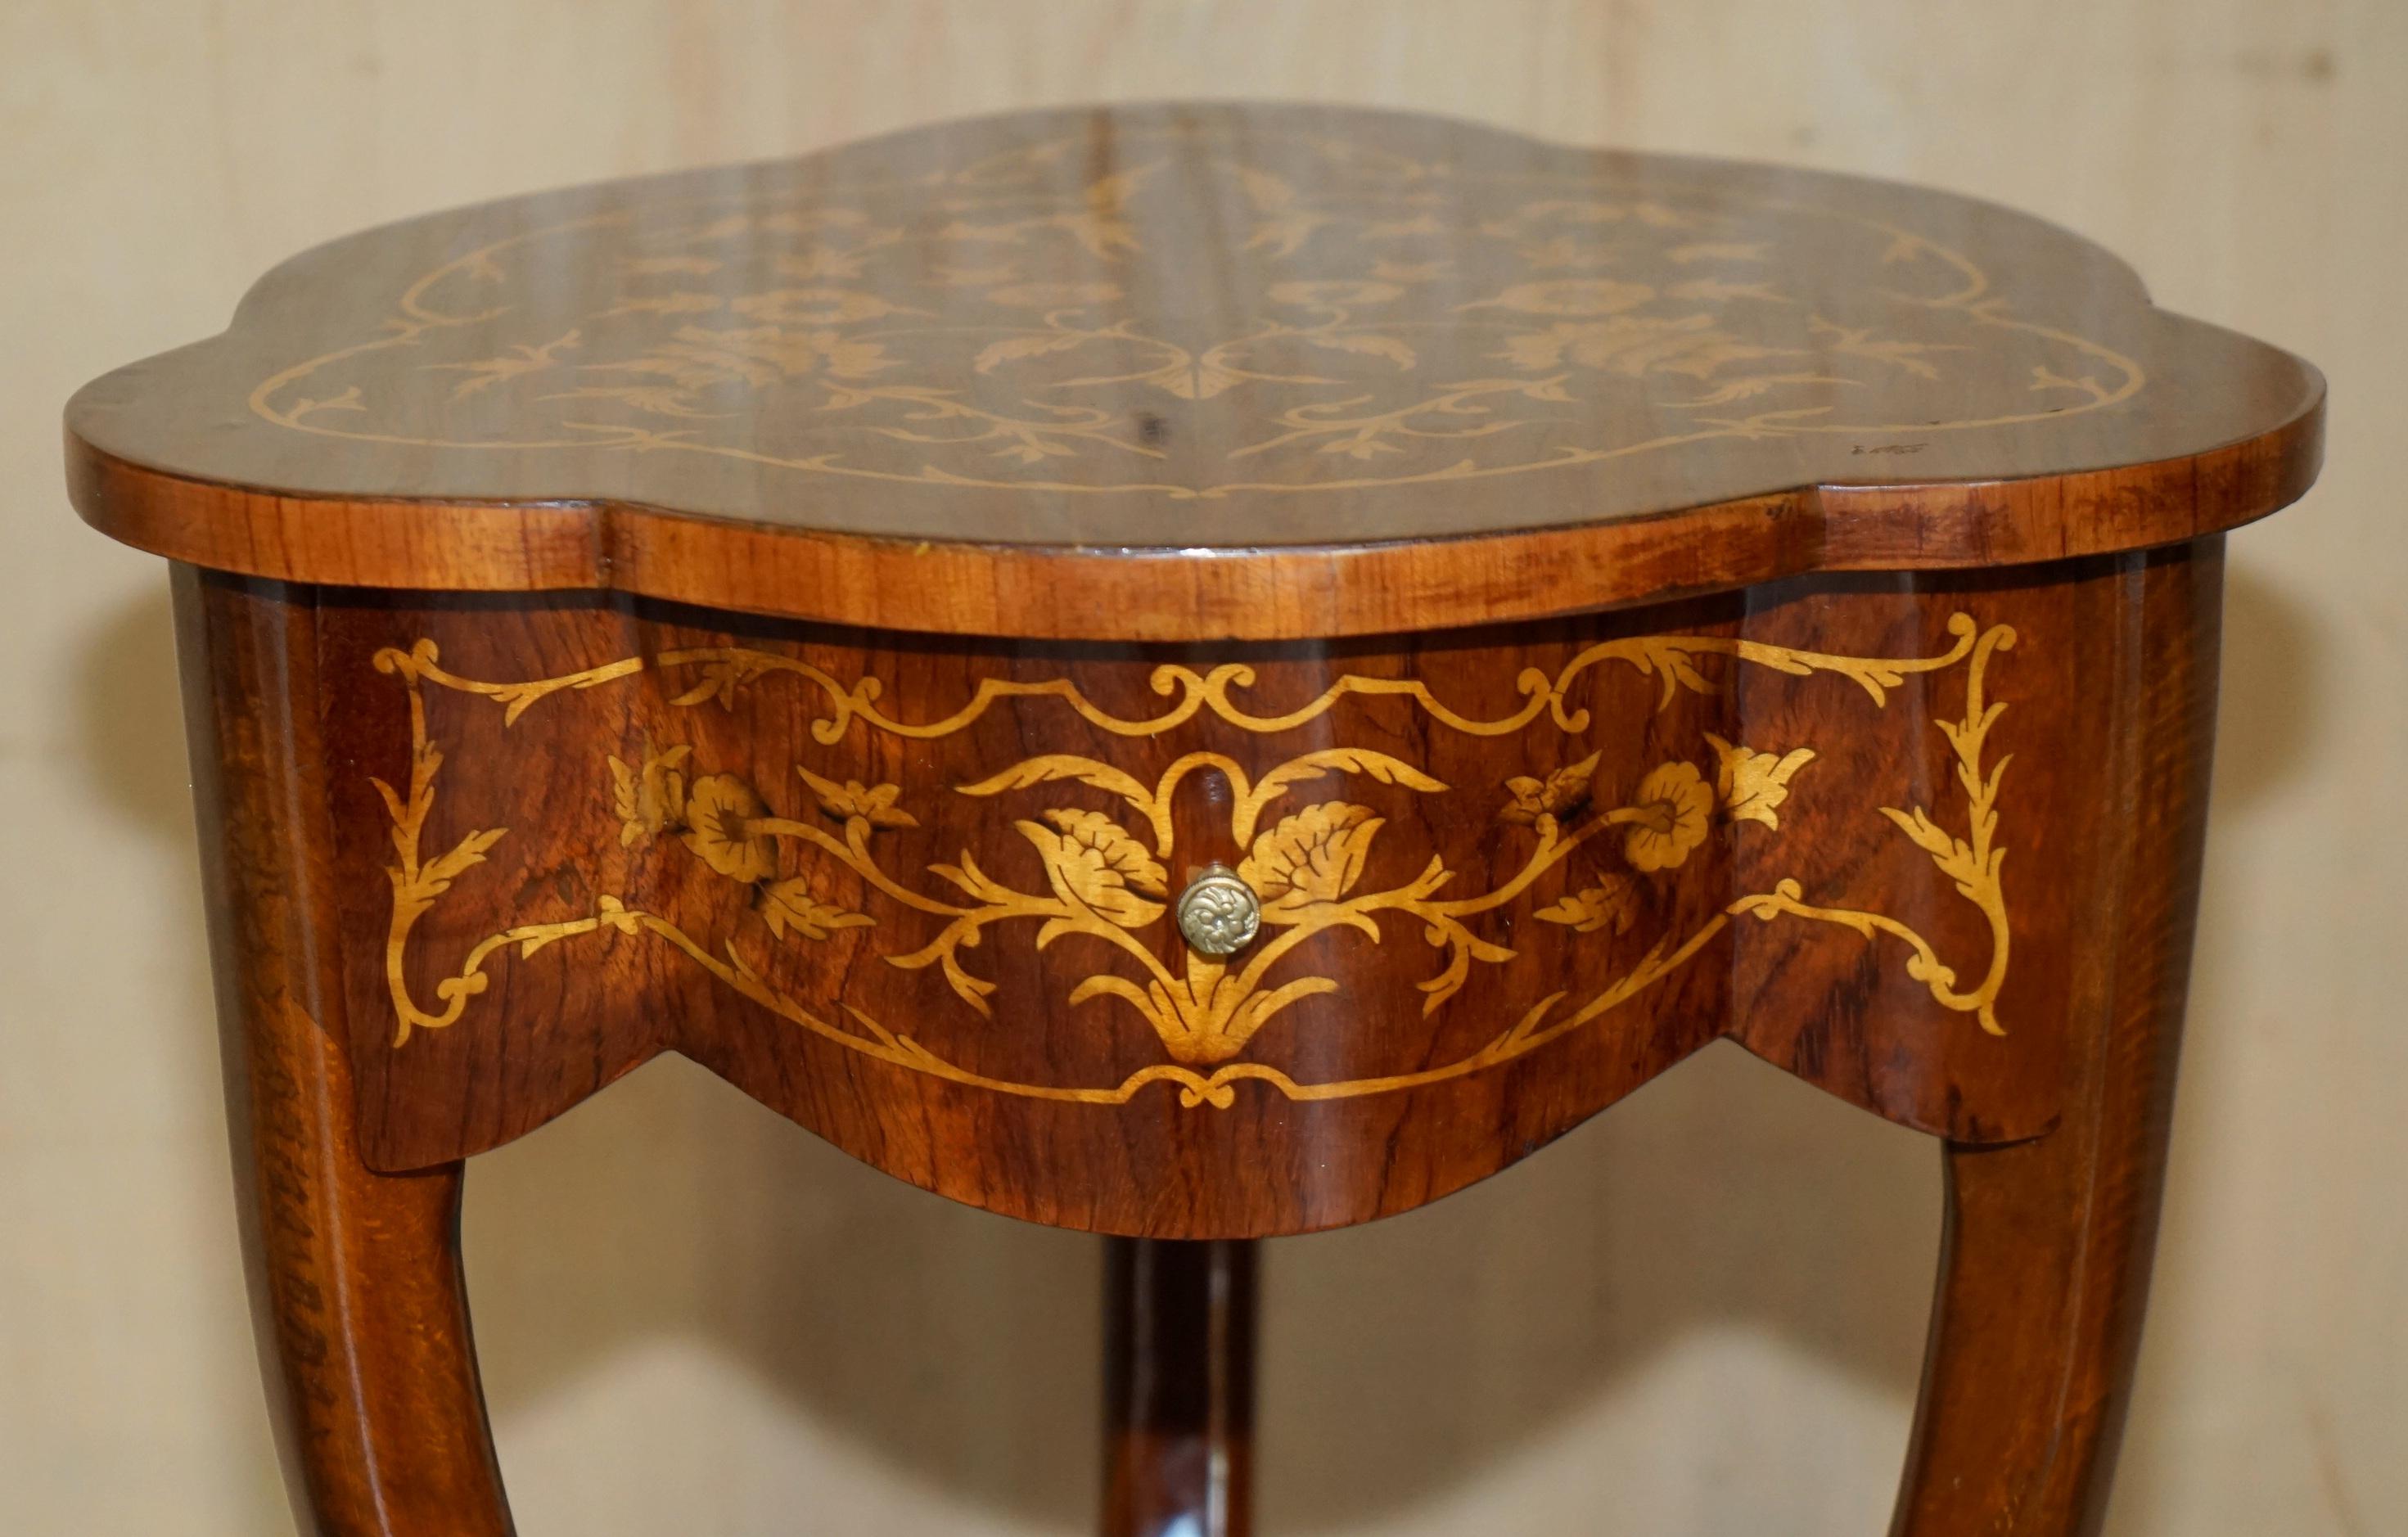 PAIR OF ART DECO STYLE SYCAMORE WOOD & WALNUT INLAID PEDESTAL SIDE END TABLEs For Sale 14